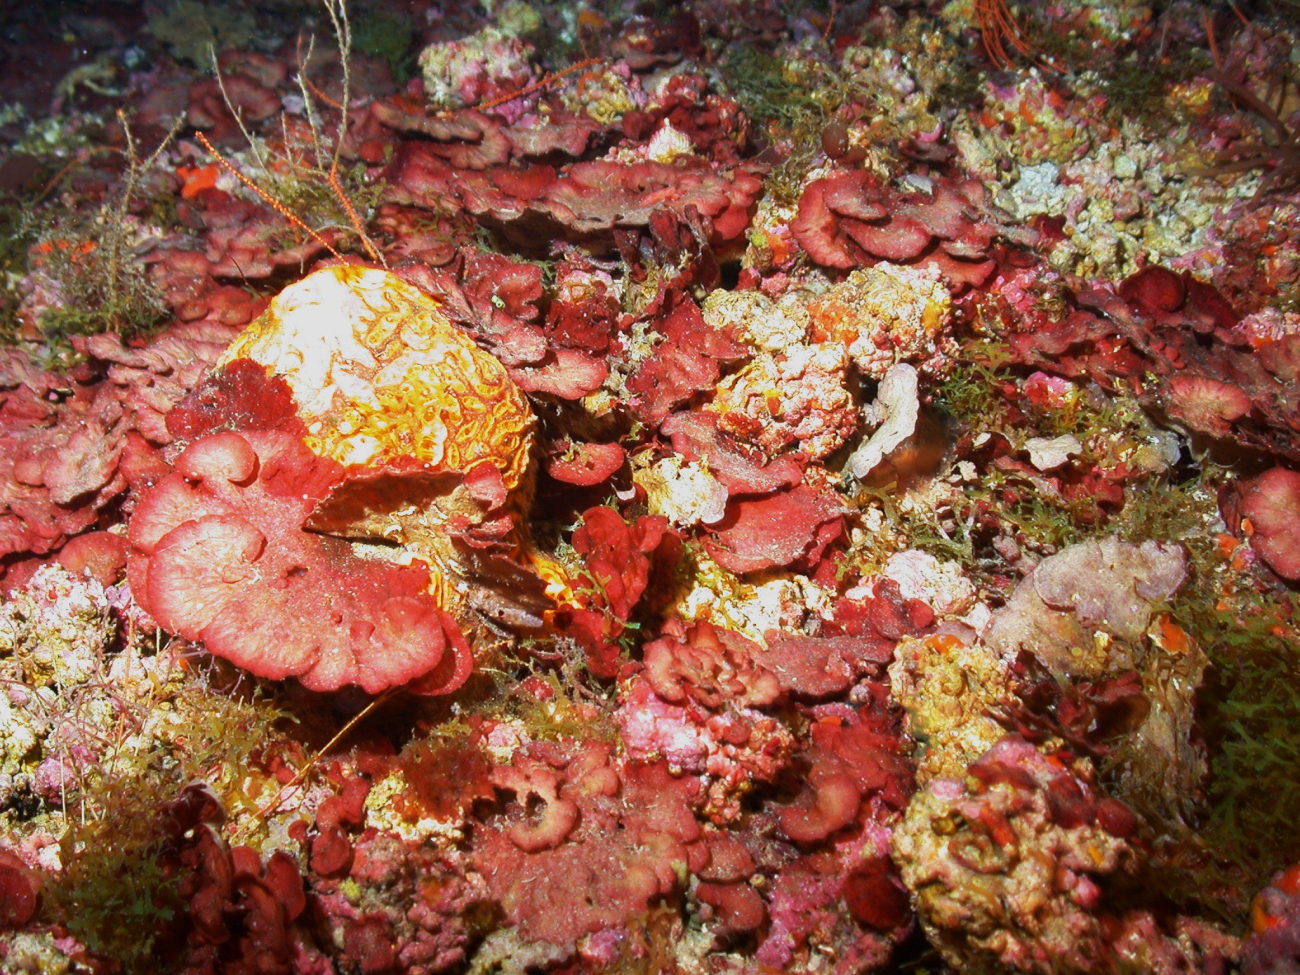 At 66 meters depth on McGrail Bank, this field of red algal coralline nodules iscovered with the red platelike alga Peyssonnelia inamoena and representatives of of the brown algal genus Dictyota